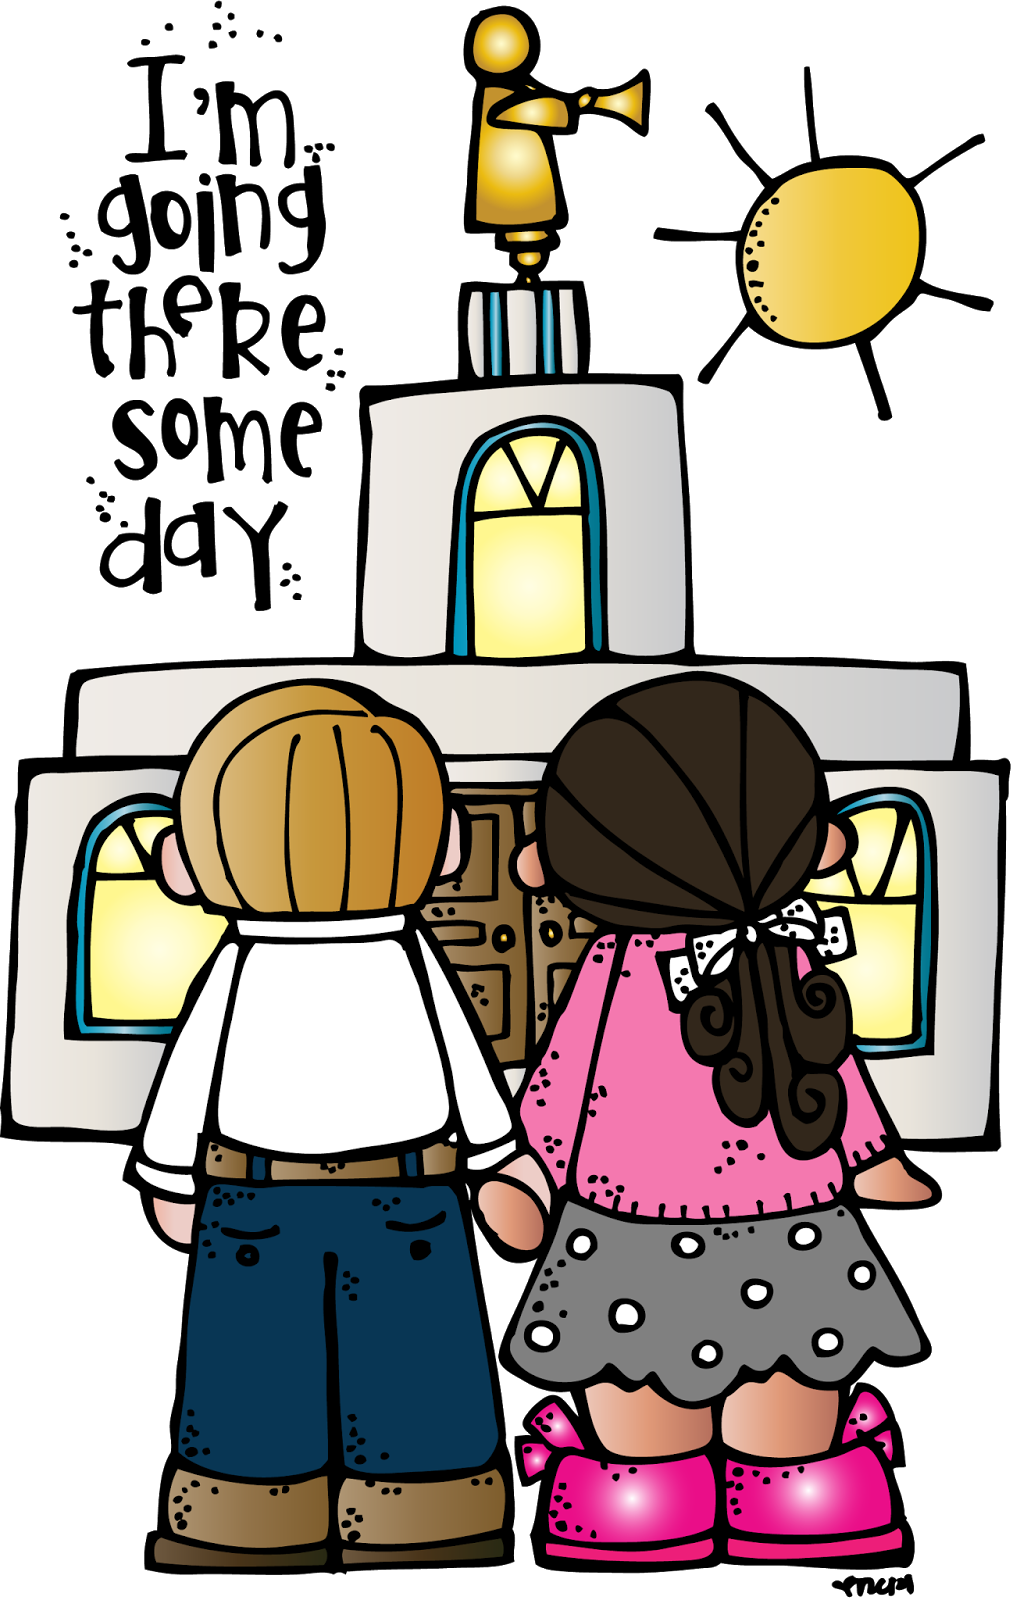 Lds melonheadz illustrating iglesia. Excited clipart fun game